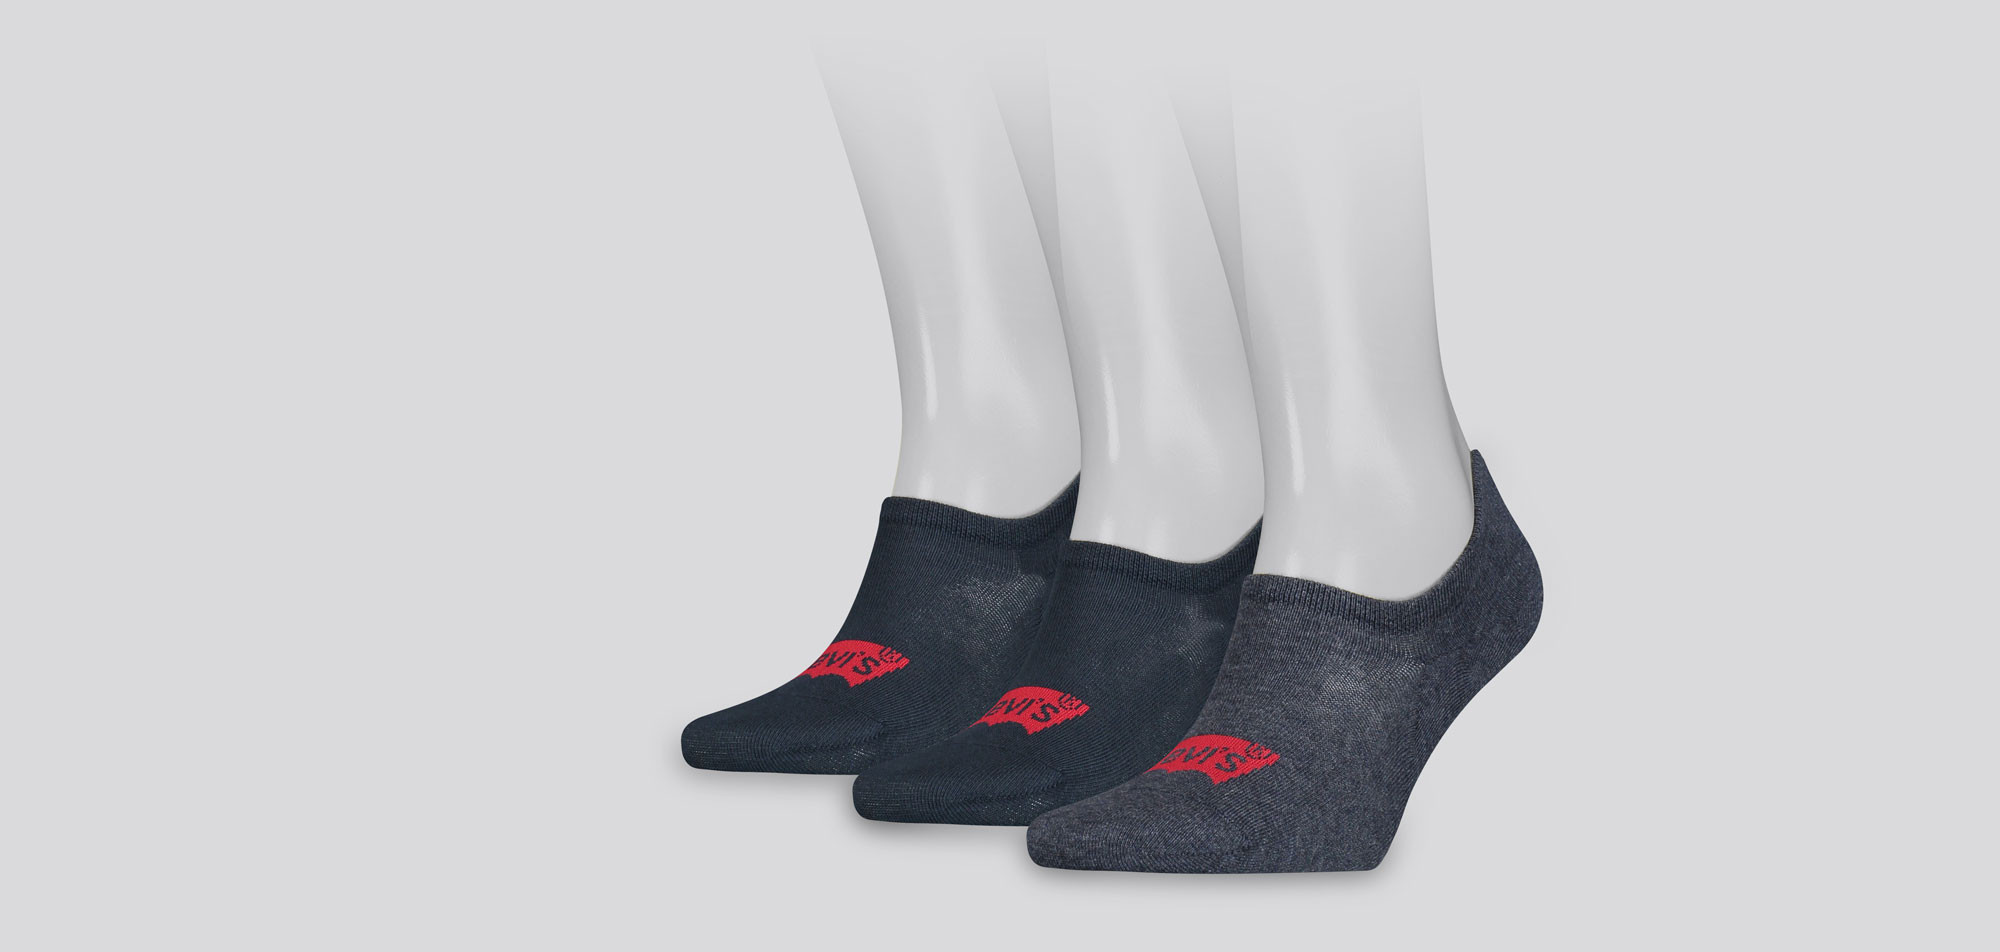 Levi_s High Rise Batwing Logo Footie Socks 3-Pack 129, color Nee